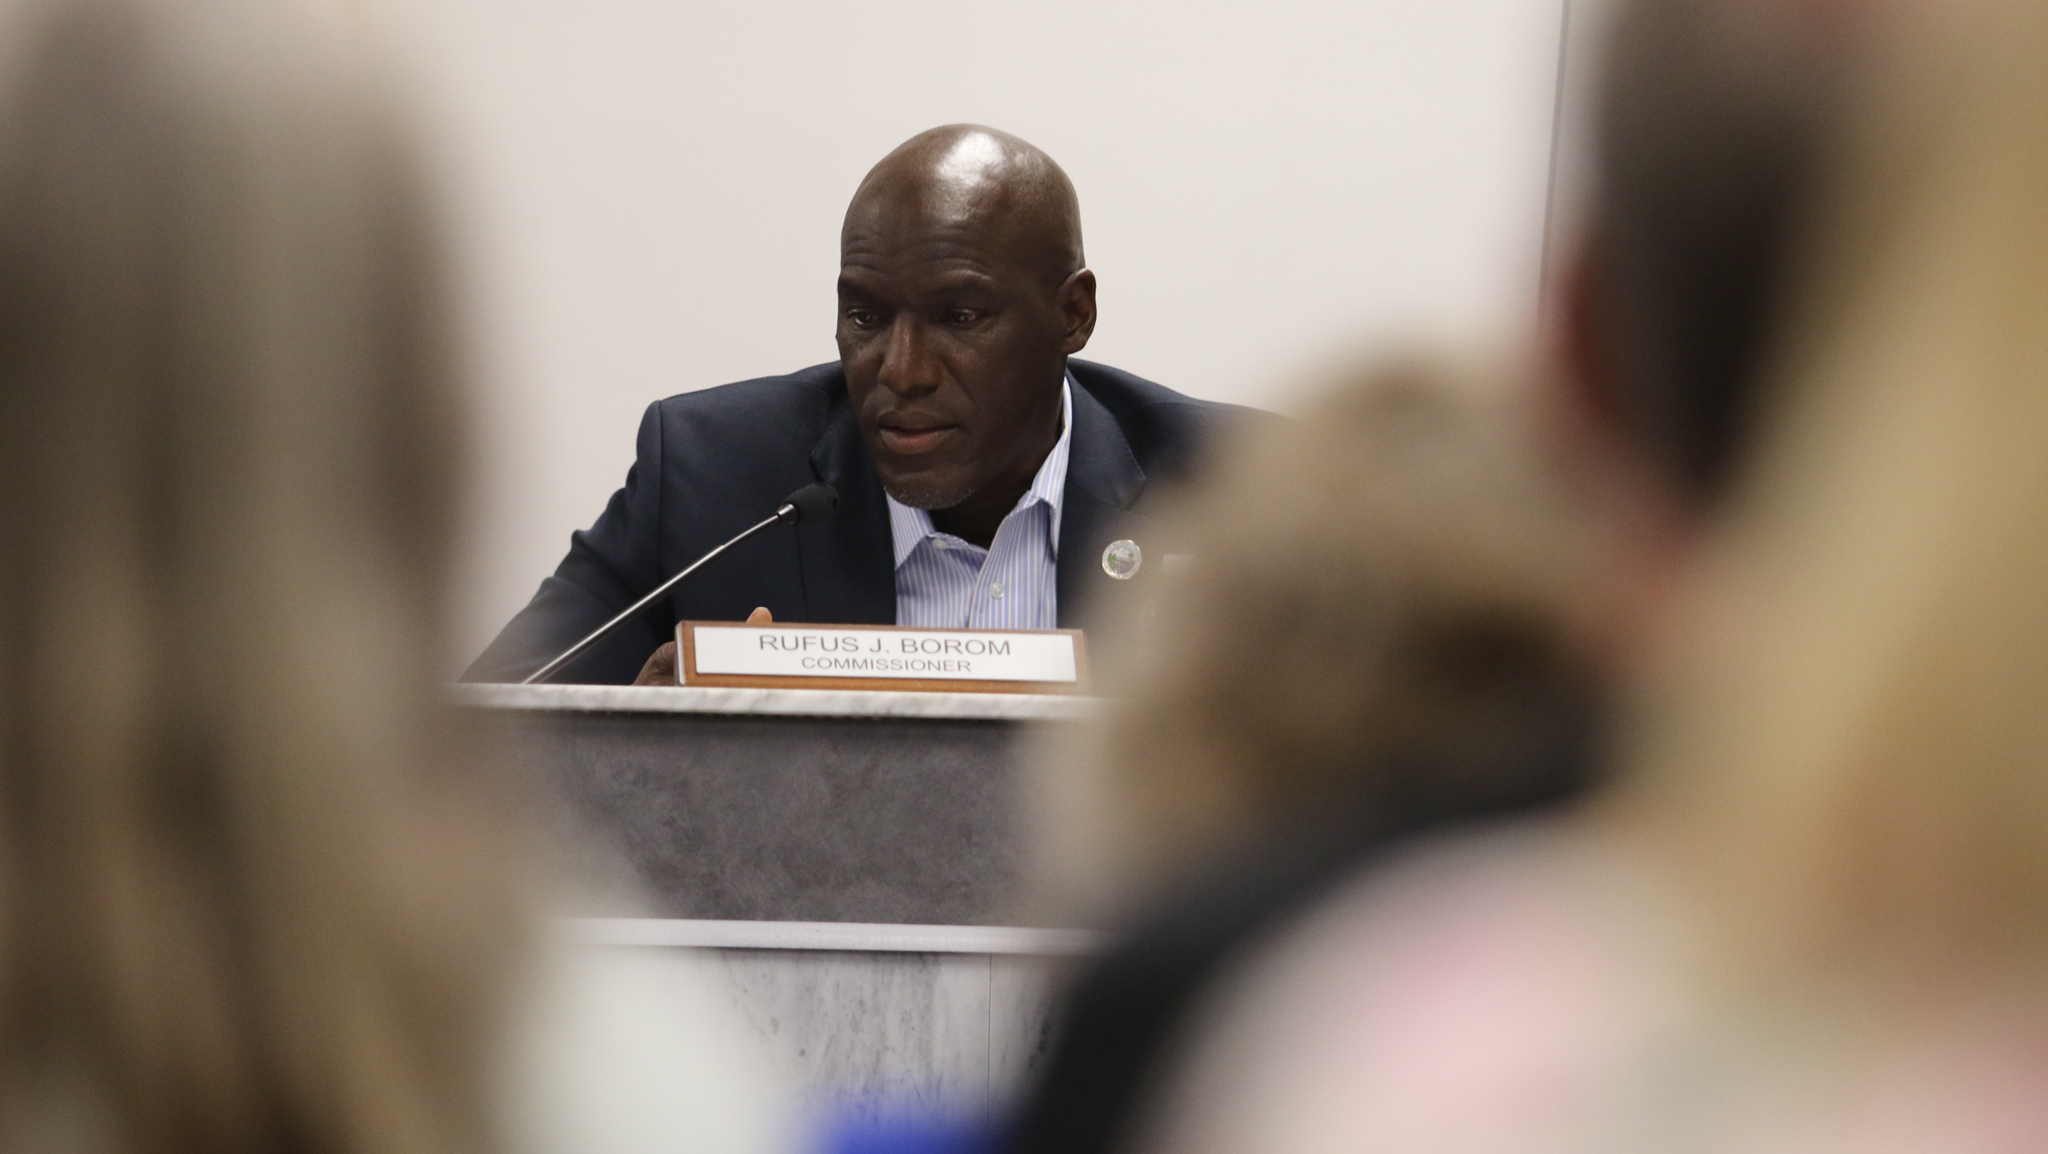 SARAH CAVACINI/Palatka Daily News. Palatka City Commissioner Rufus Borom shares his thoughts during Thursday's commission meeting about rezoning Hammock Hall. He and his fellow commissioners would later vote unanimously to keep Hammock Hall's zoning as it currently sits. 